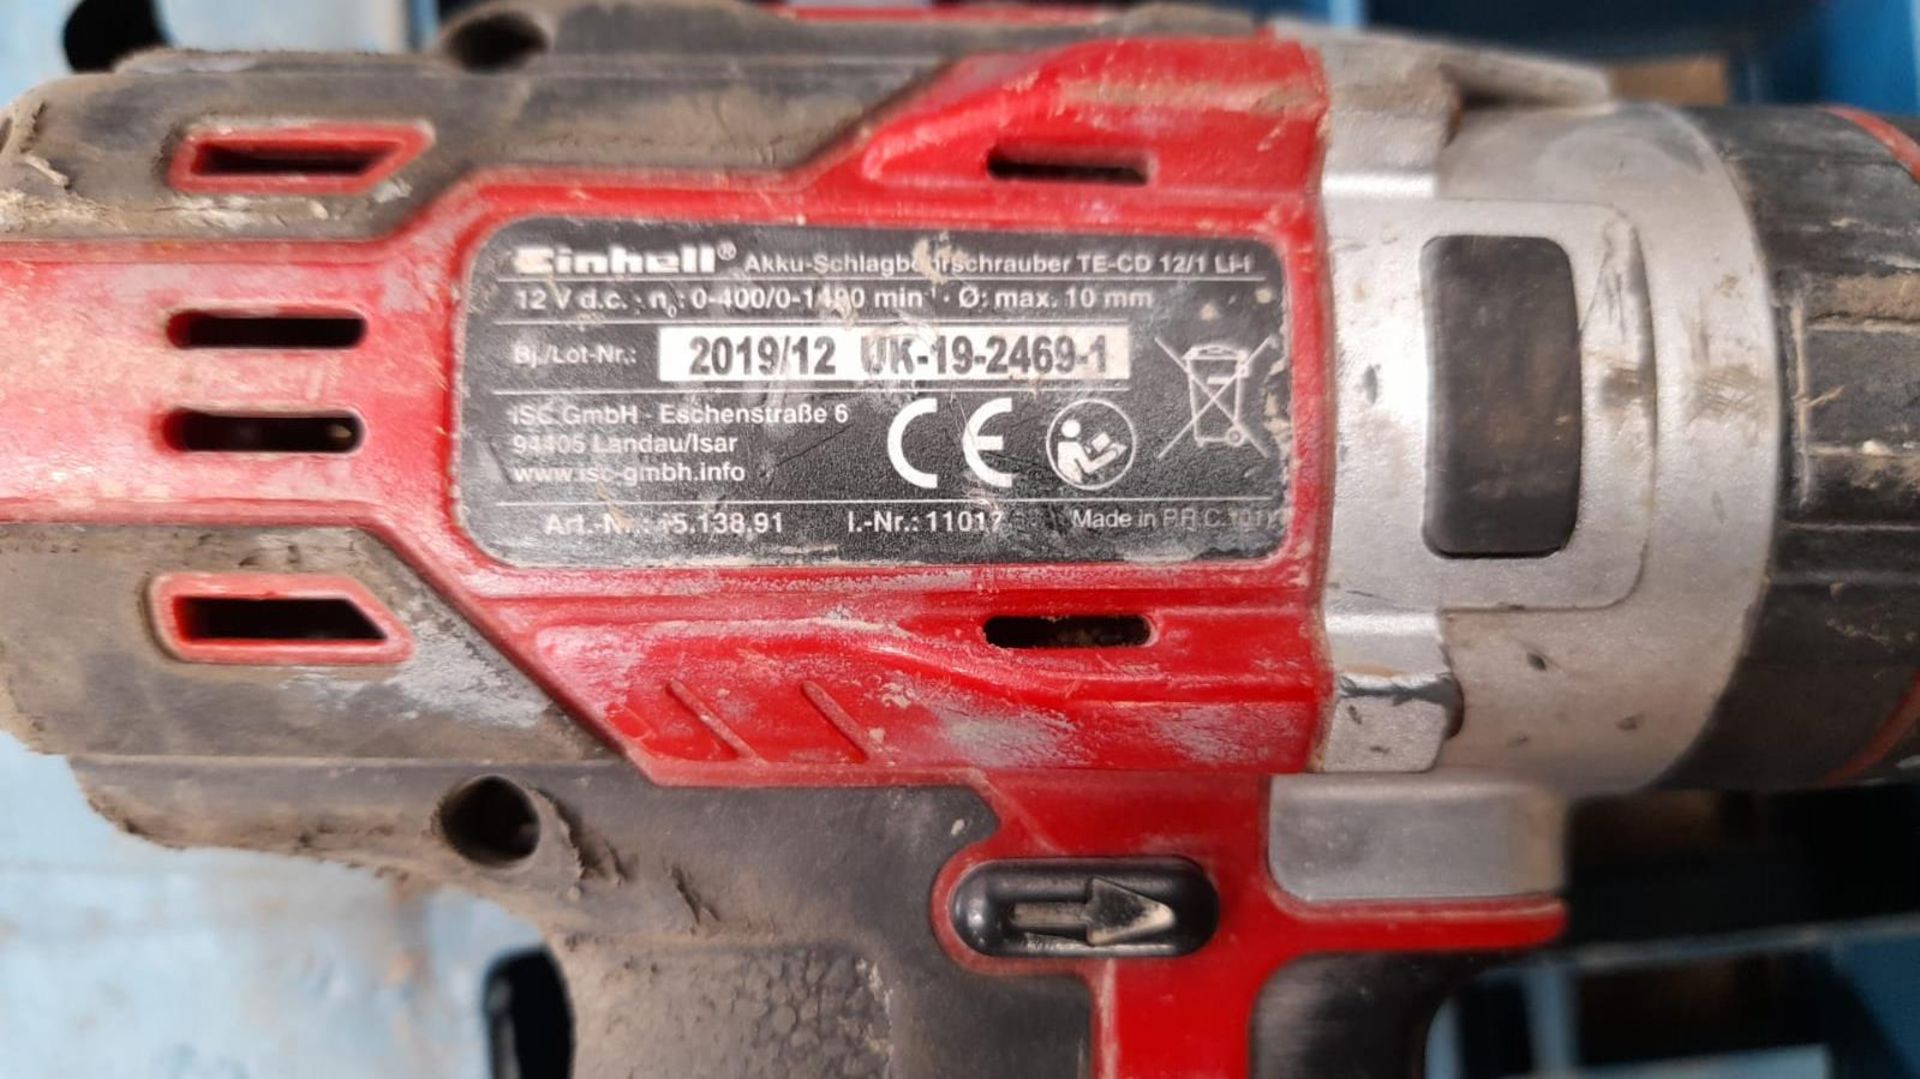 EINHELL DRILL, UNTESTED AS IT HAS NO BATTERY *PLUS VAT* - Image 2 of 2